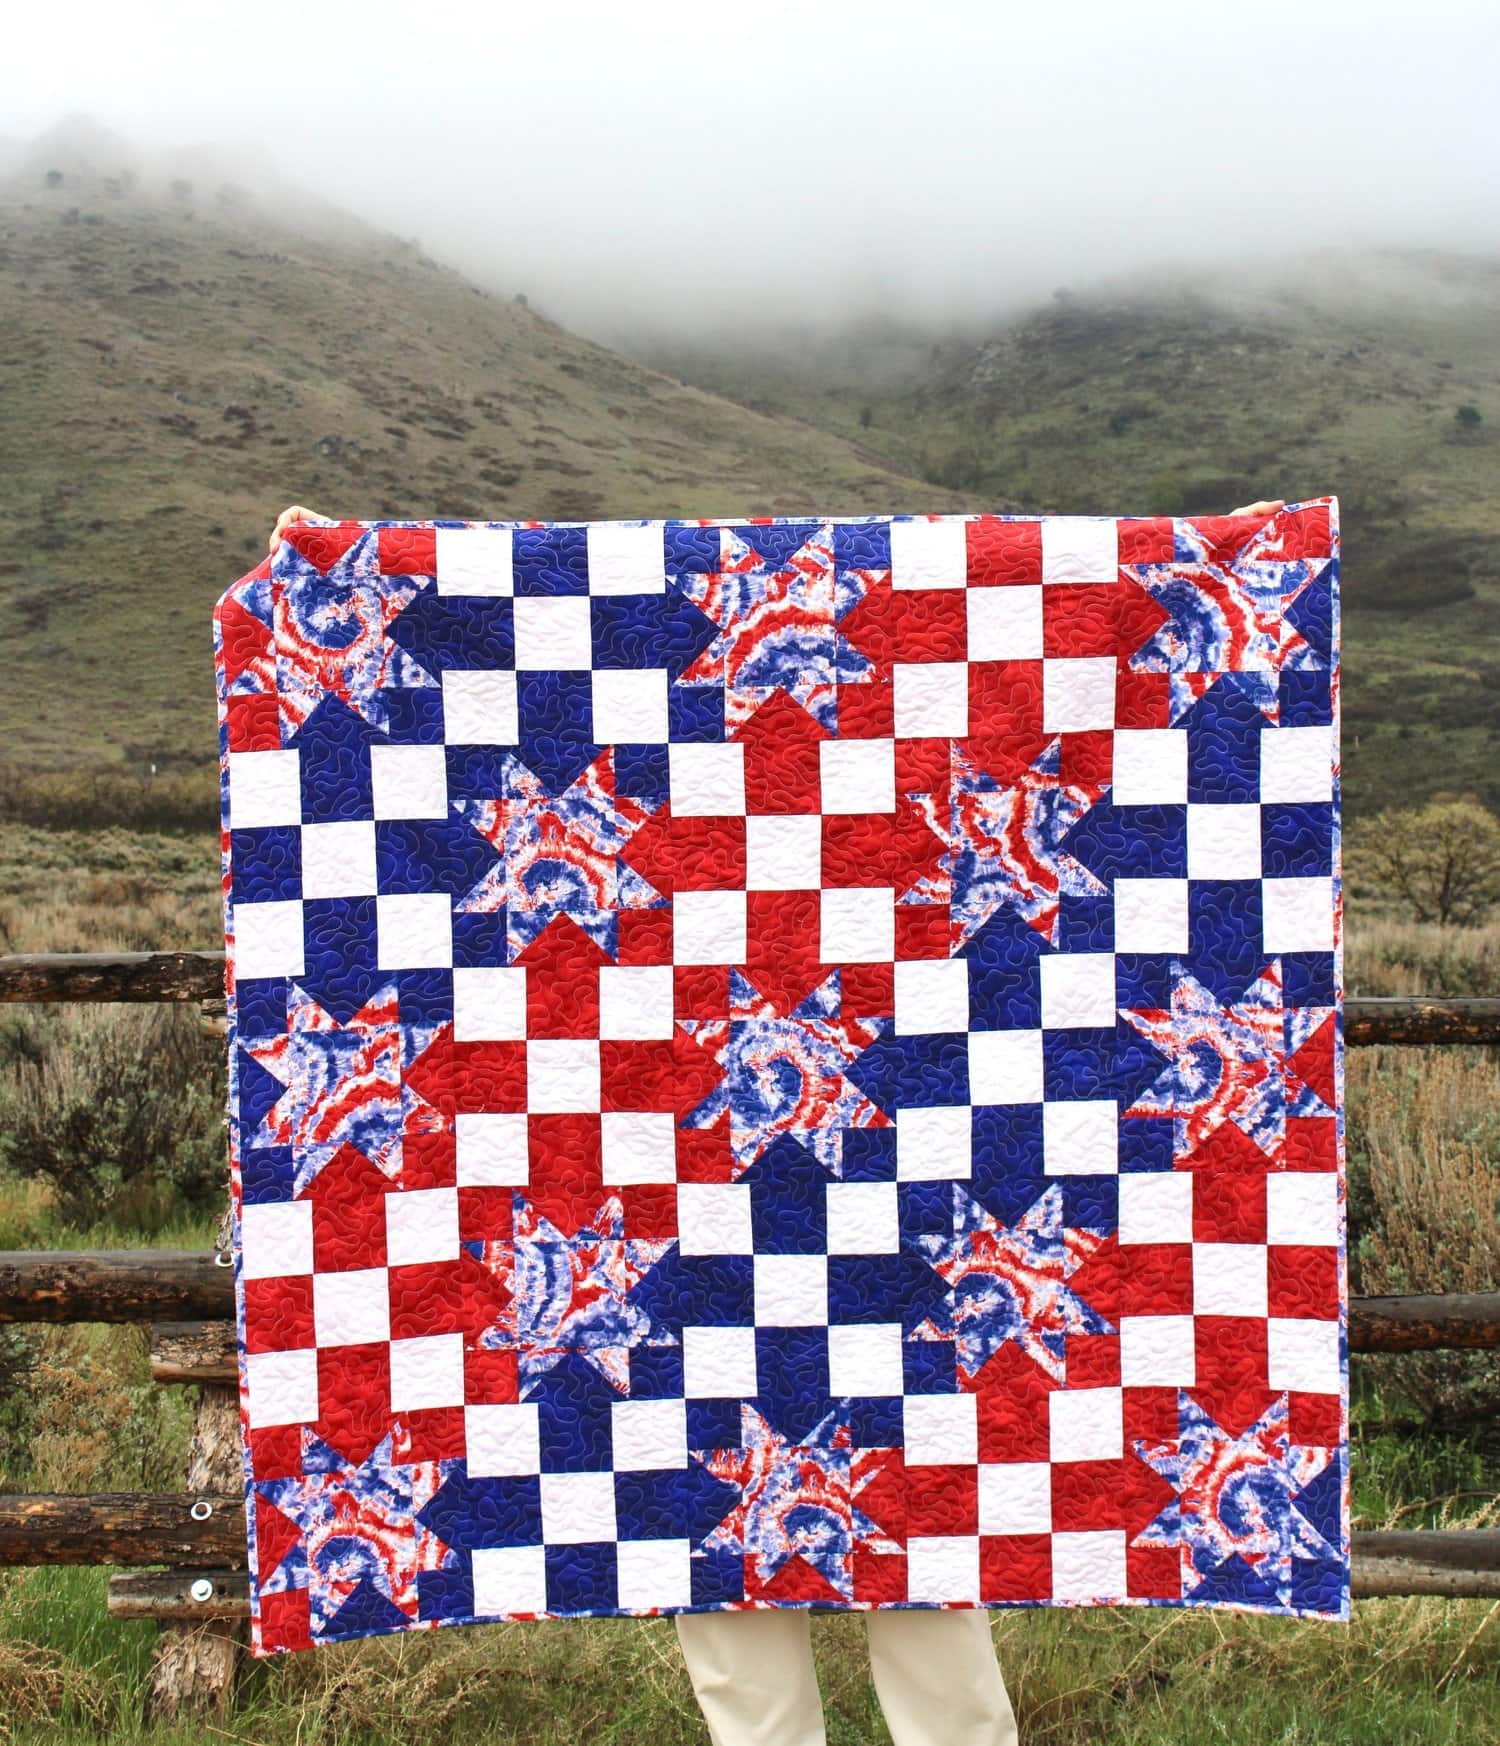 red, white and blue patchwork quilt